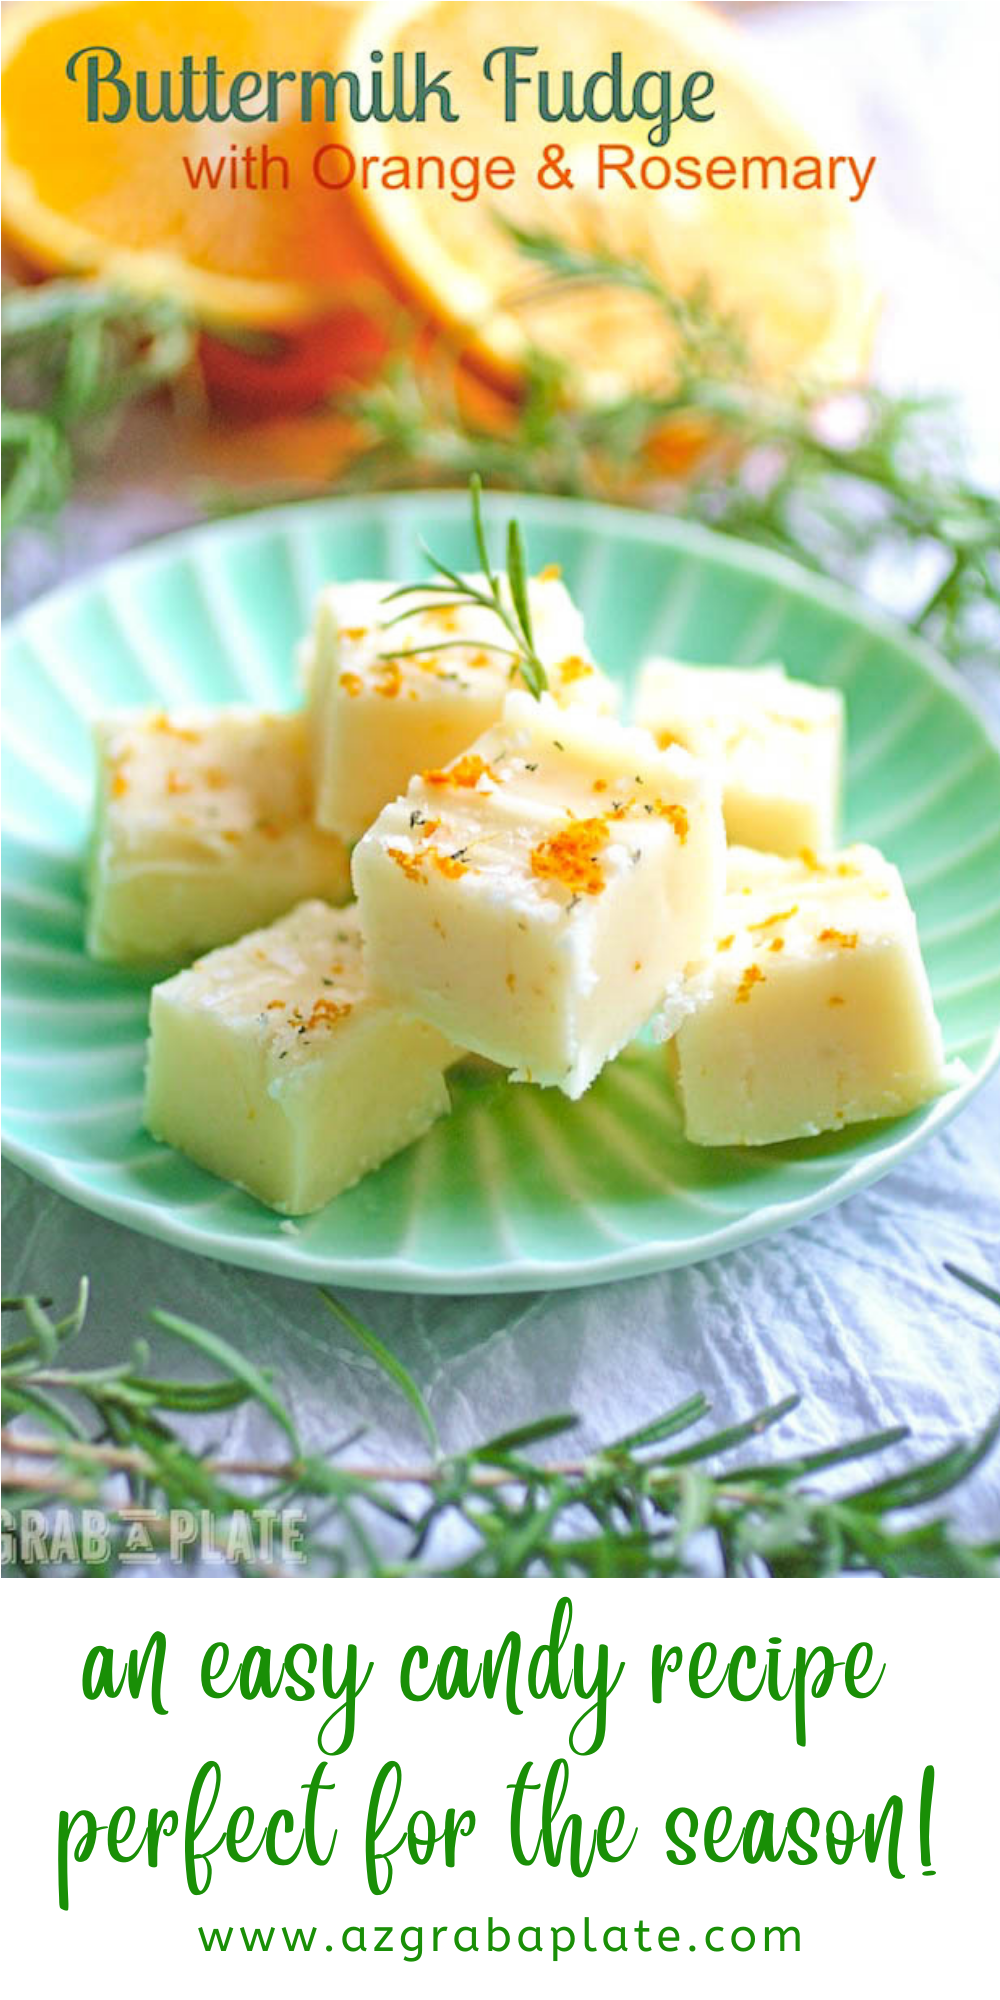 Buttermilk Fudge with Orange & Rosemary is candy you'll want to make and give! This fudge is so easy to make, too!